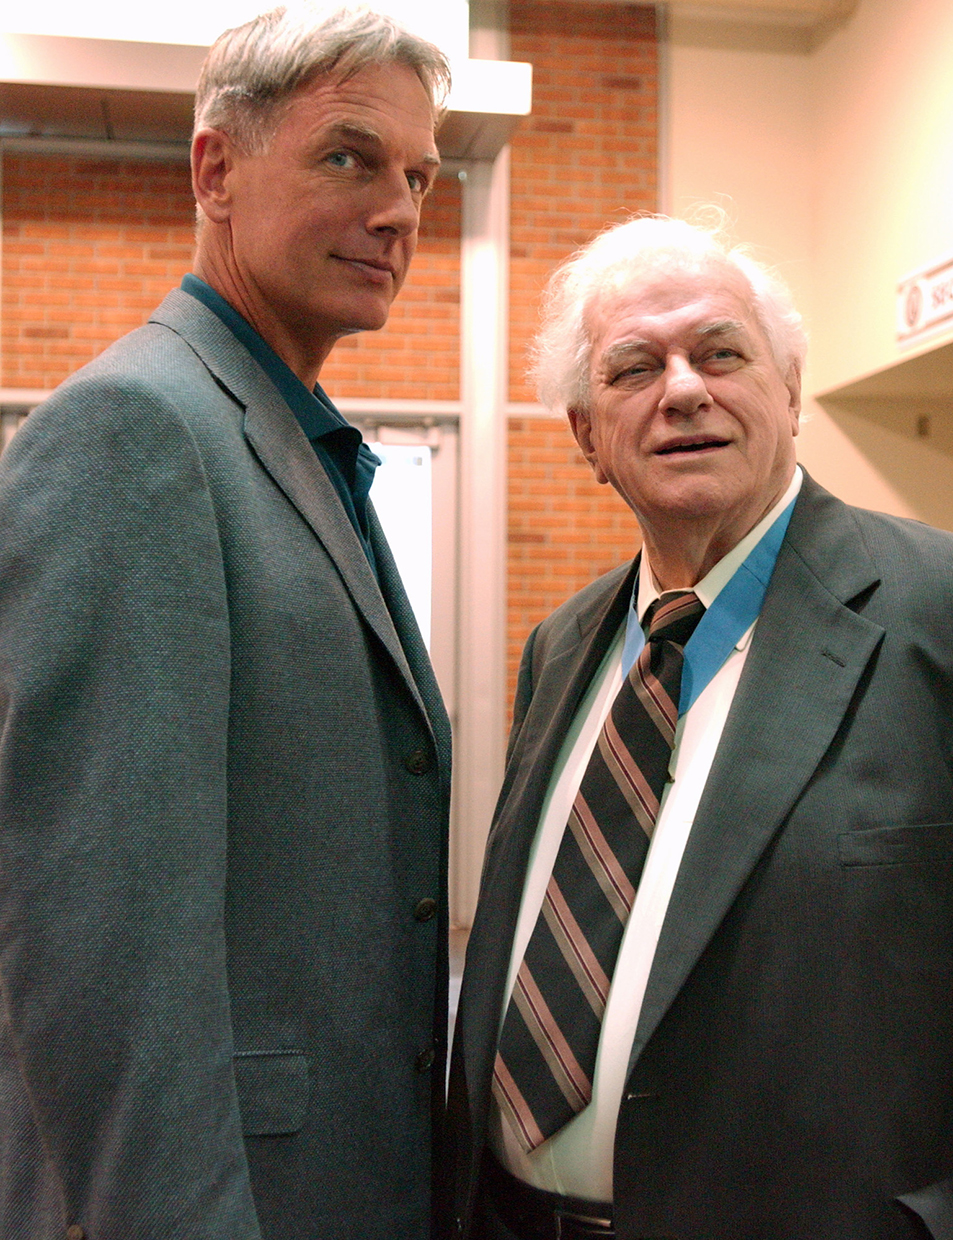 Mark Harmon and Charles Durning in NCIS - 'Call of Silence' - Season 2, Episode 7